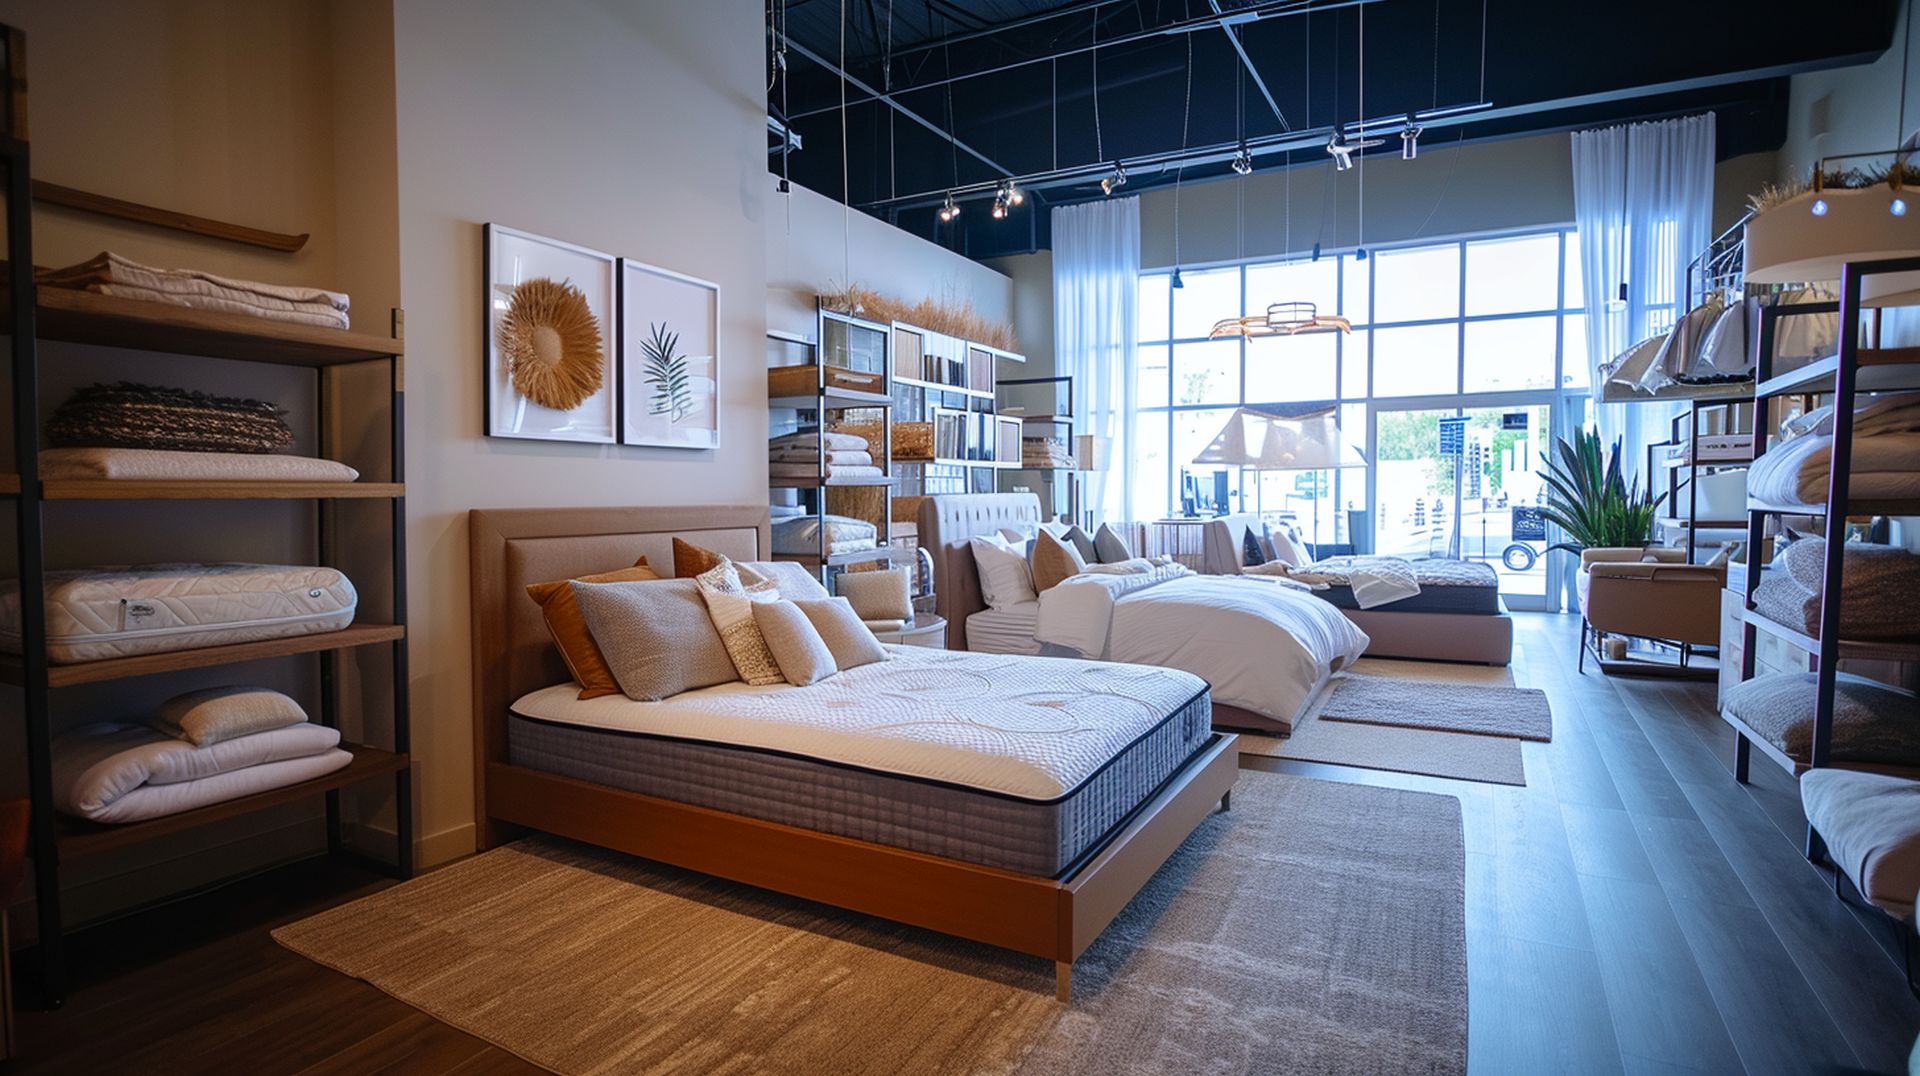 Local Santee mattress stores have the best prices, sales, and deals if you're looking for a new mattress in Santee